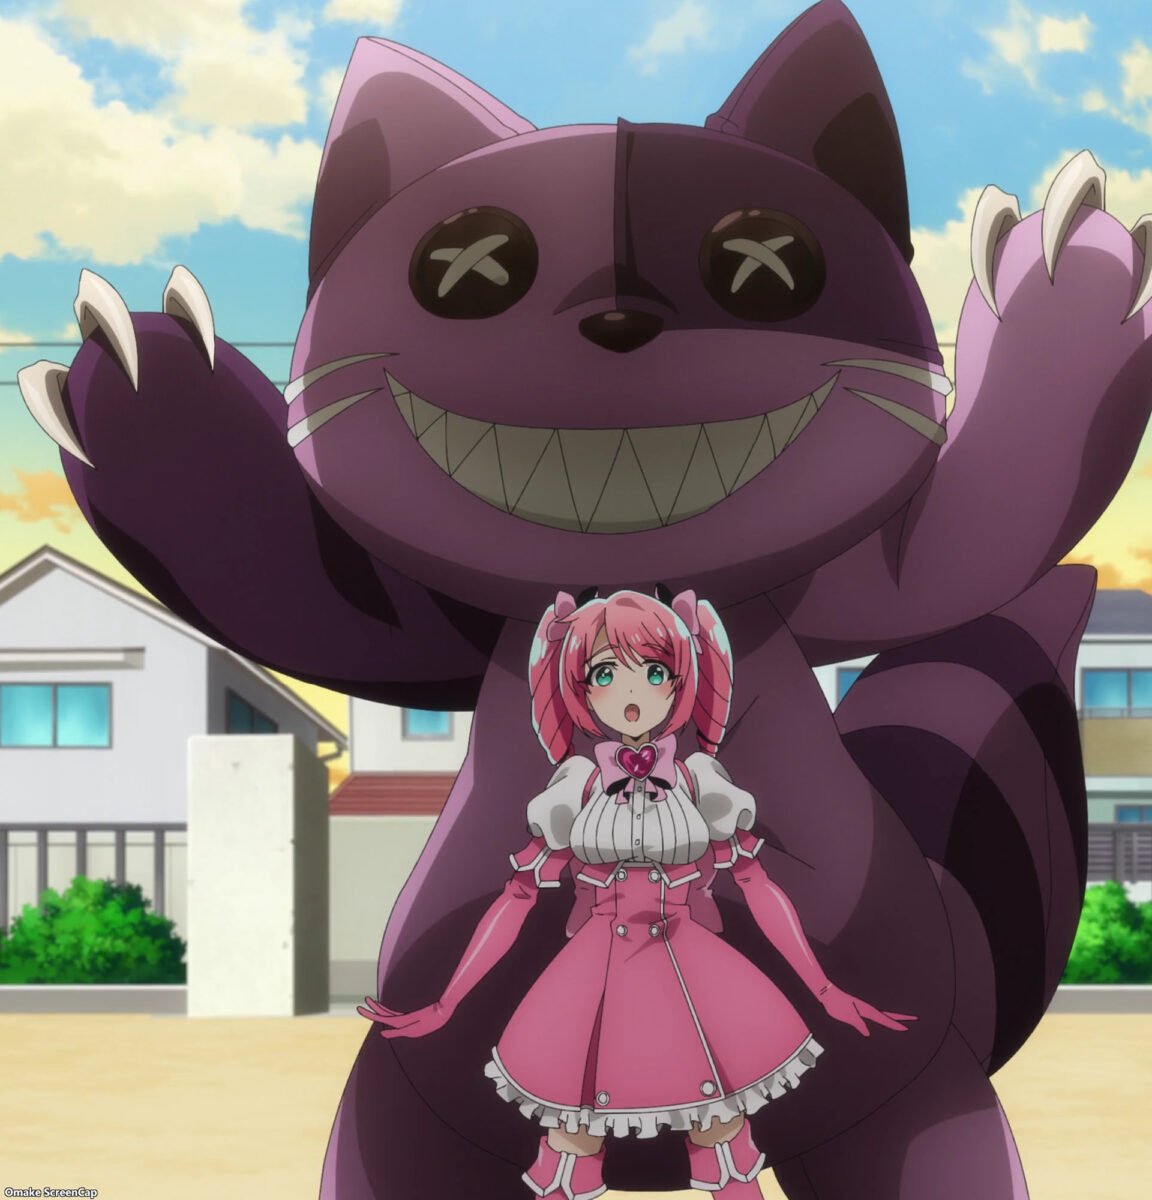 Gushing Over Magical Girls Episode 6 Cheshire Cat Behind Magenta